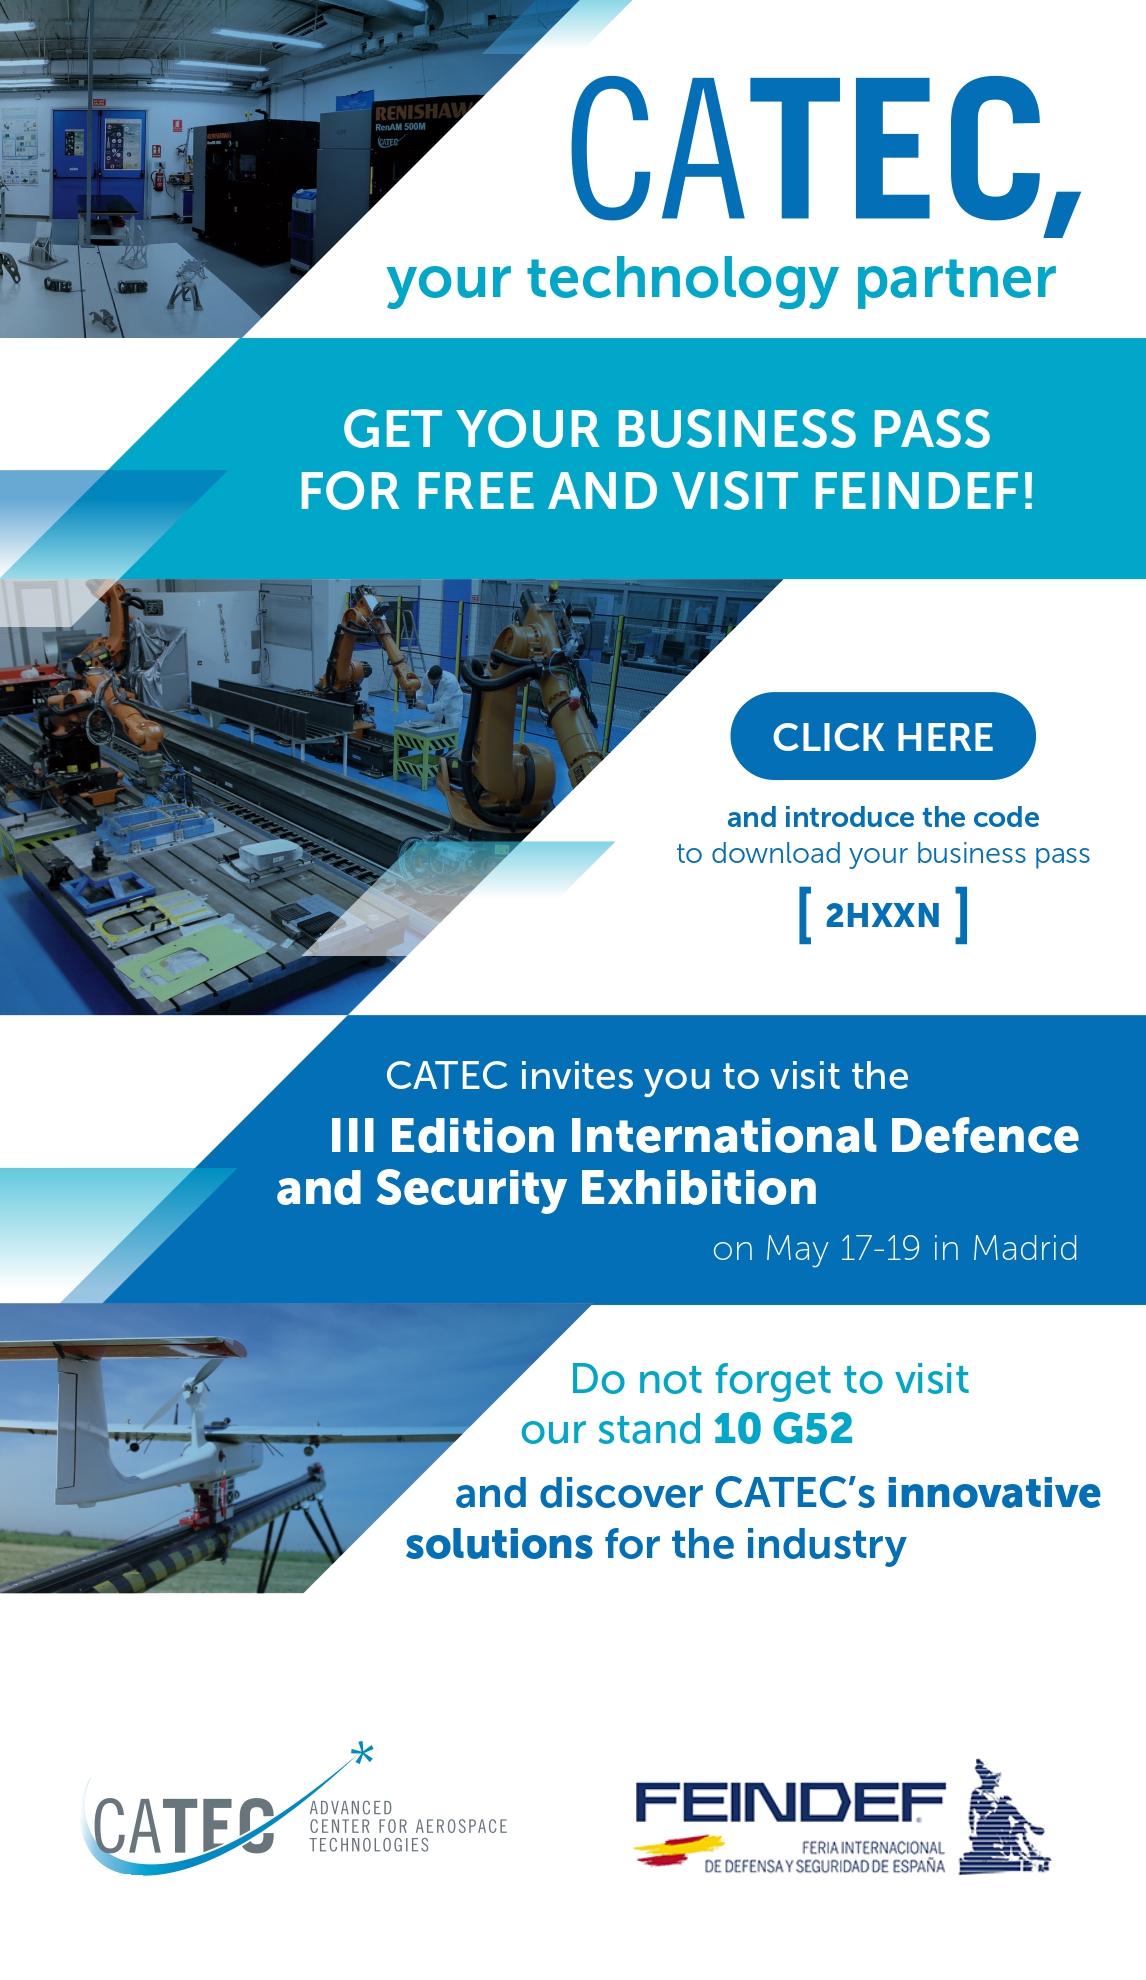 CATEC invites you to visit FEINDEF 2023! GET YOUR BUSINESS PASS FOR FREE